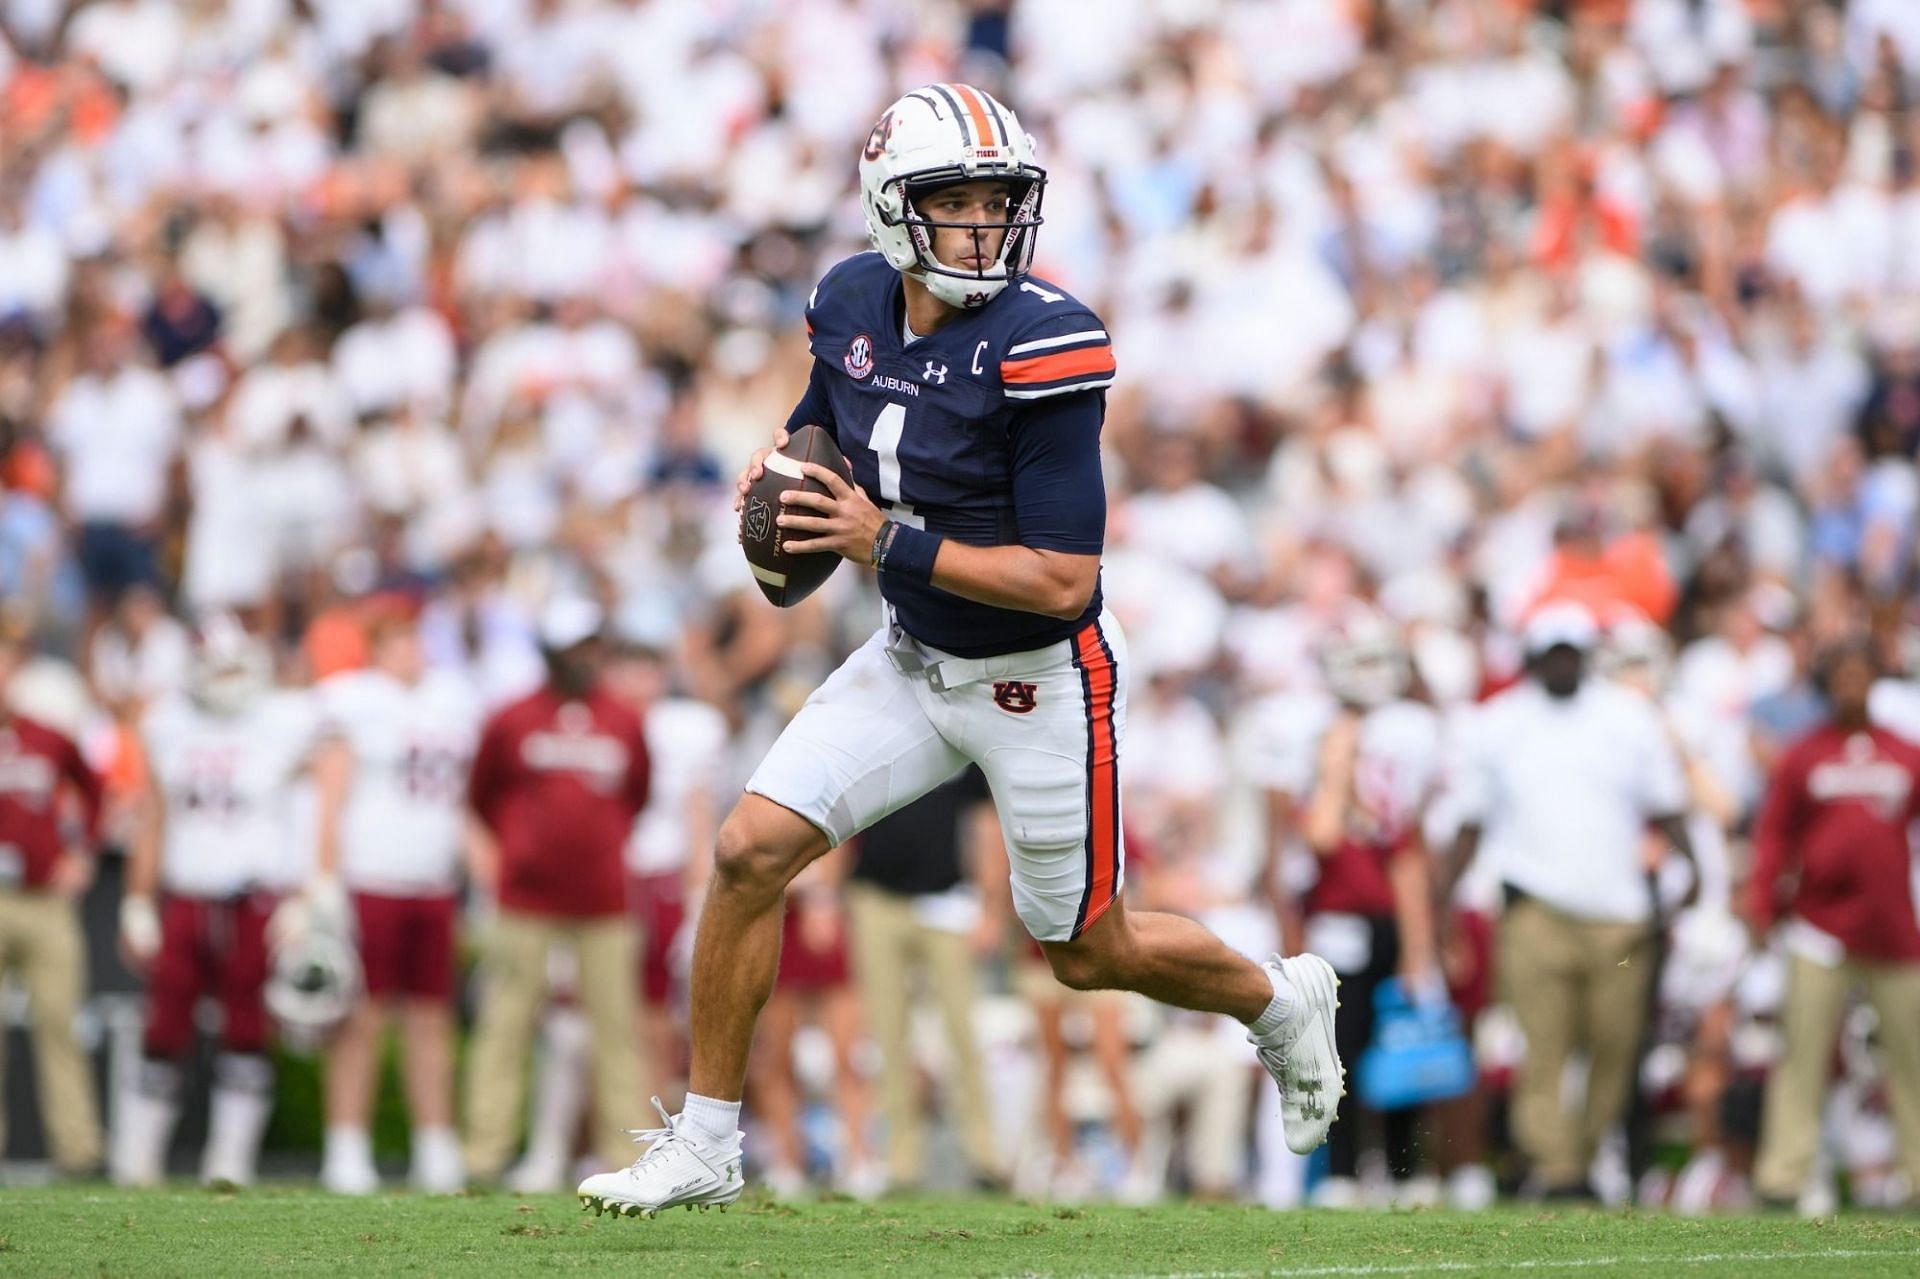 Payton Thorne is expected to start for Auburn in Week 8 of the 2023 college football season